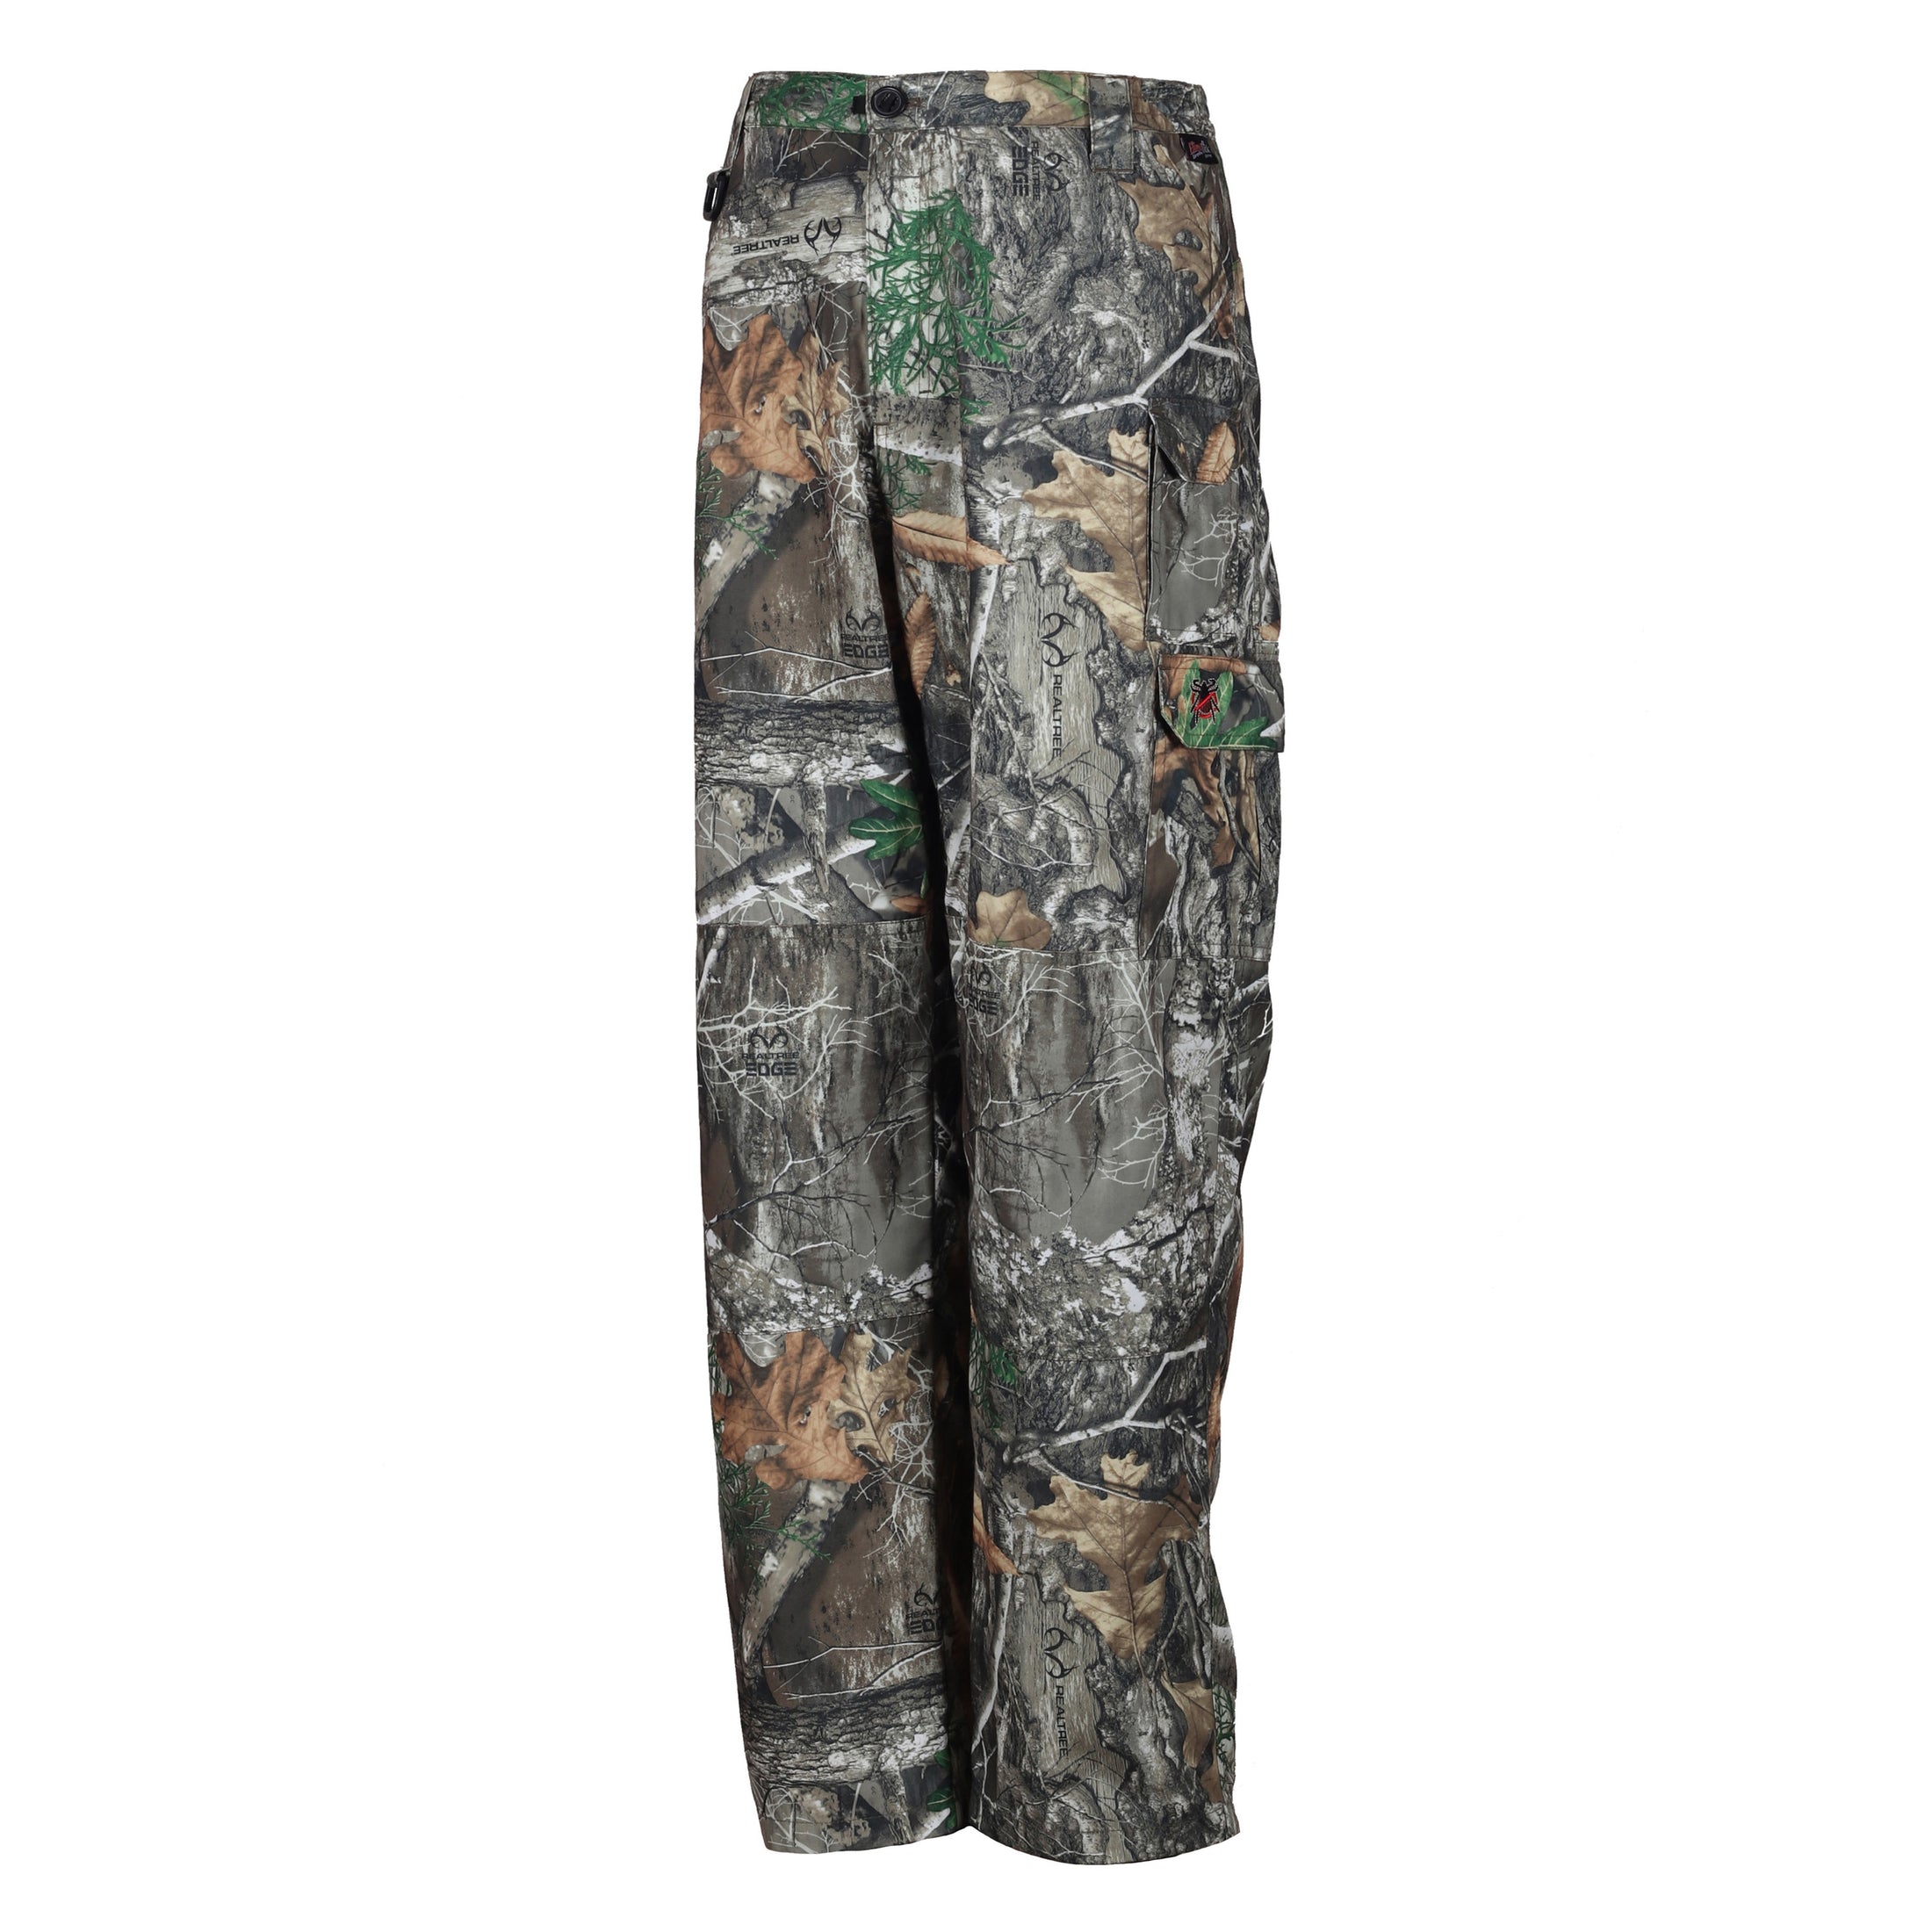 gamehide ElimiTick Tactical Style Eight Pocket Field Pant front (realtree edge)